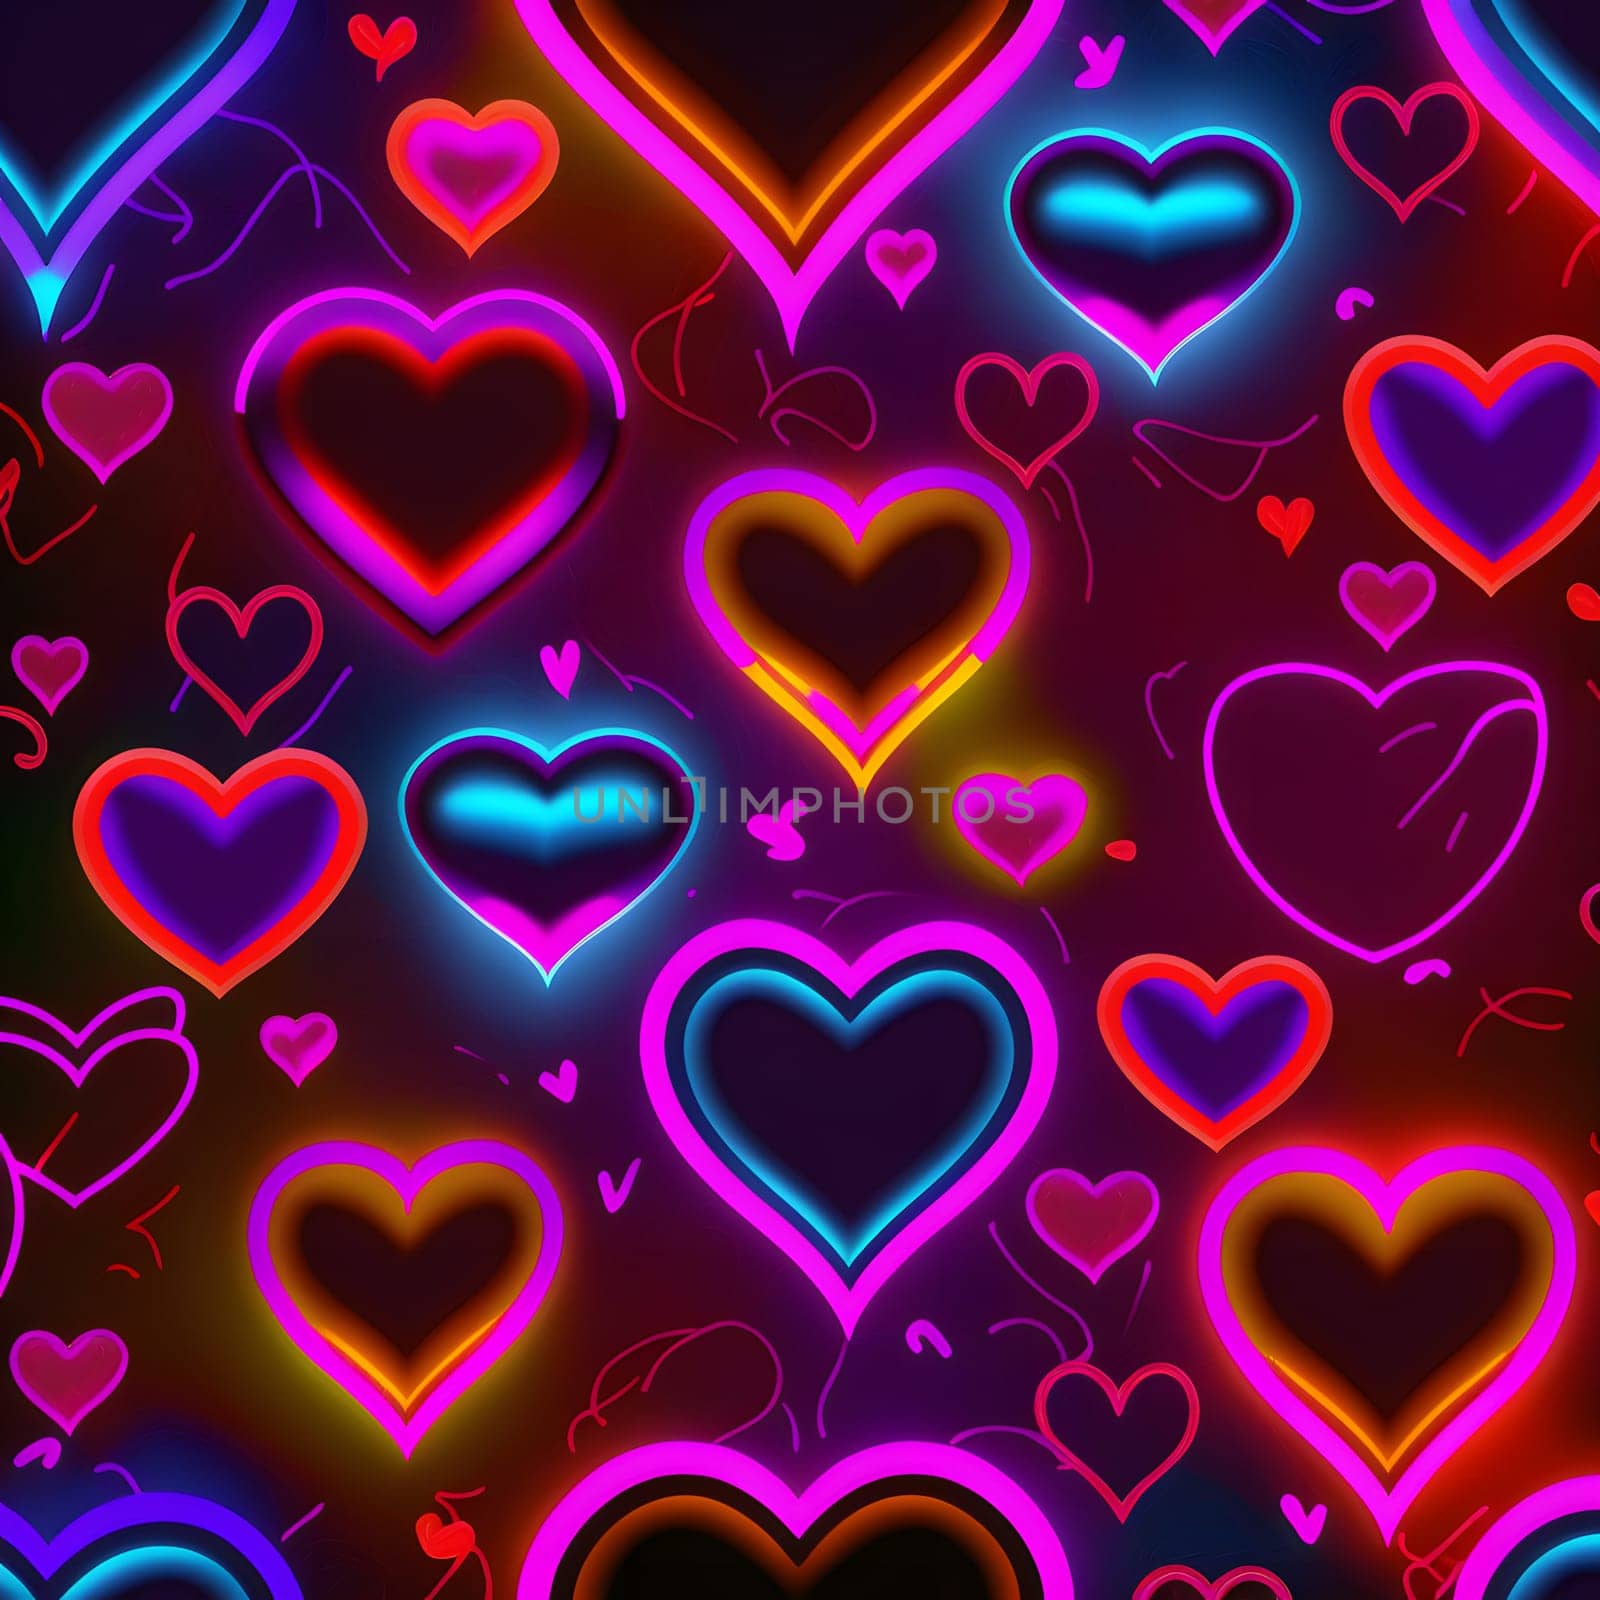 many glowing neon hearts for valentines day, neural network generated art by z1b